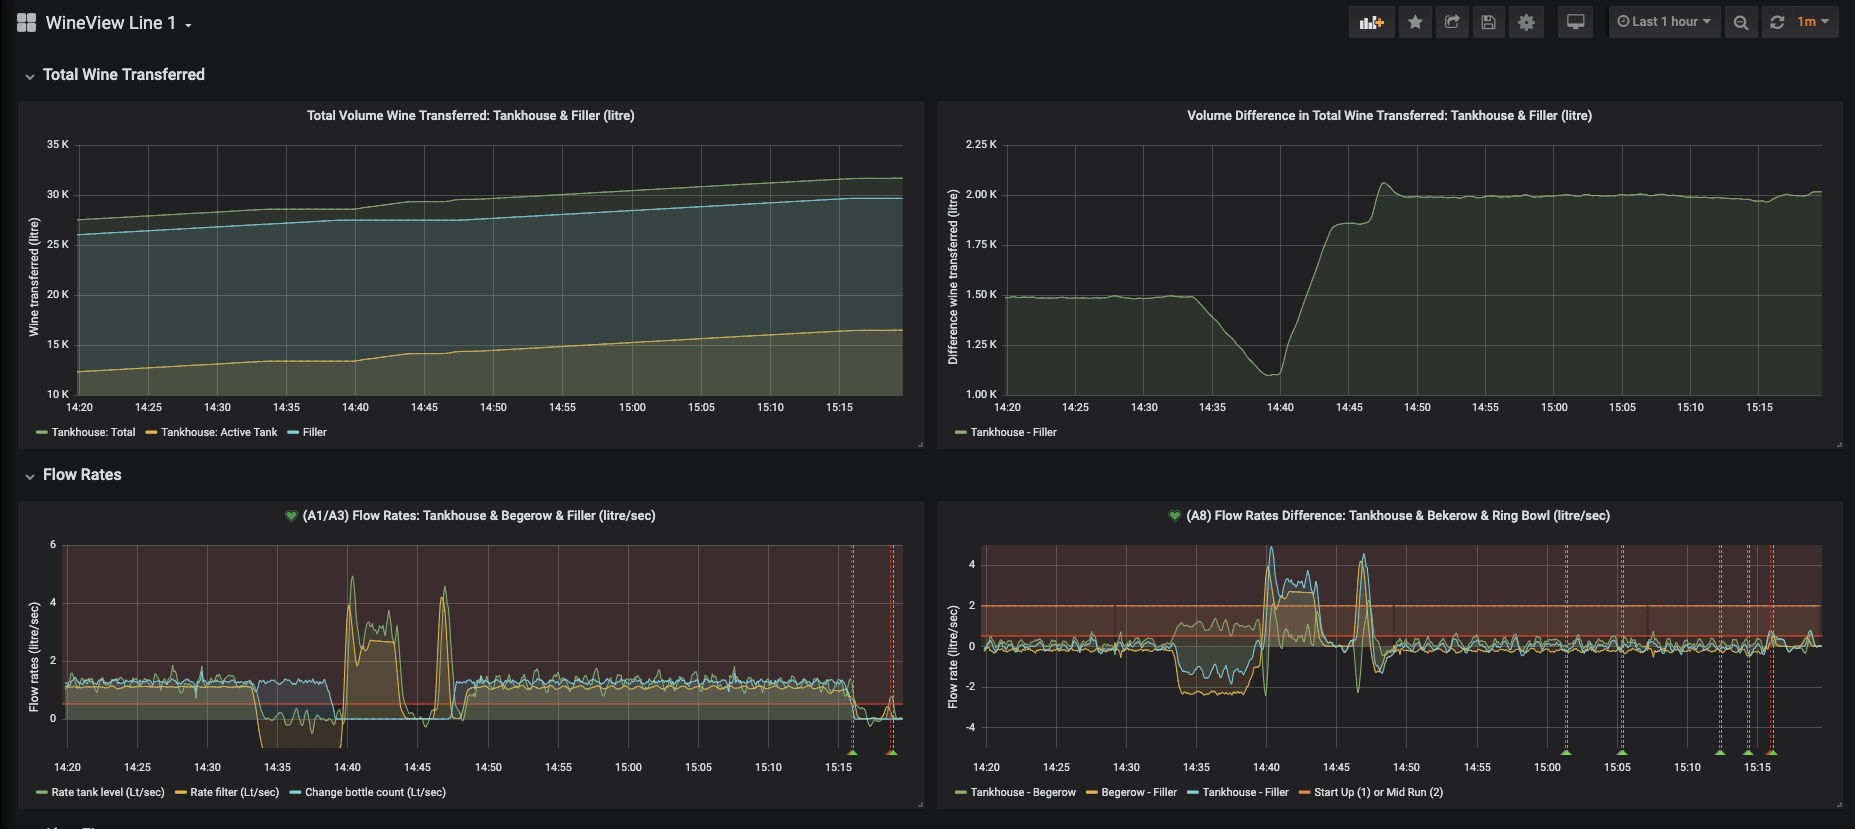 Machine learning company ML6 created a Grafana dashboard to monitor bottling operations for Accolade Wines